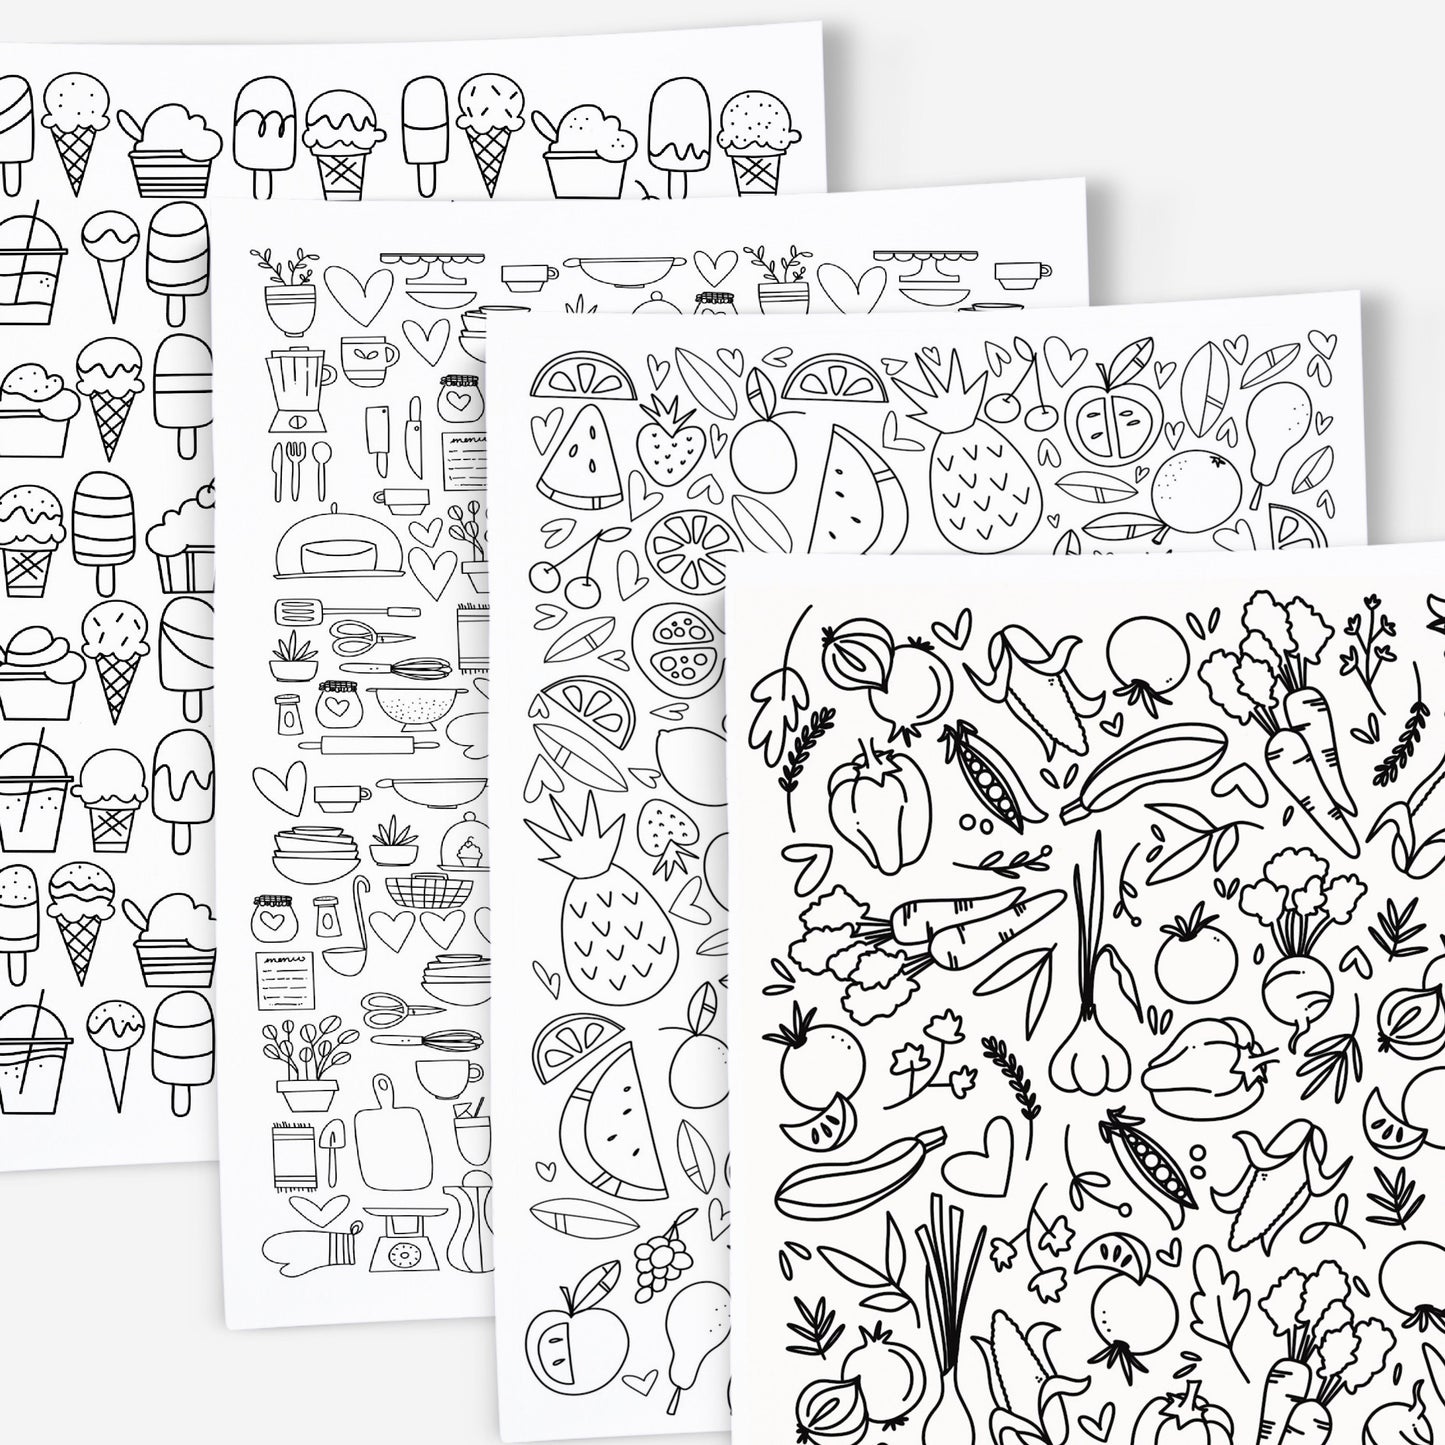 10 Pk Foodie Printable Coloring Book 10Pk Coloring Pages | Hand-Drawn Digital Coloring Book | Adult Zen Calming Color Activity Time